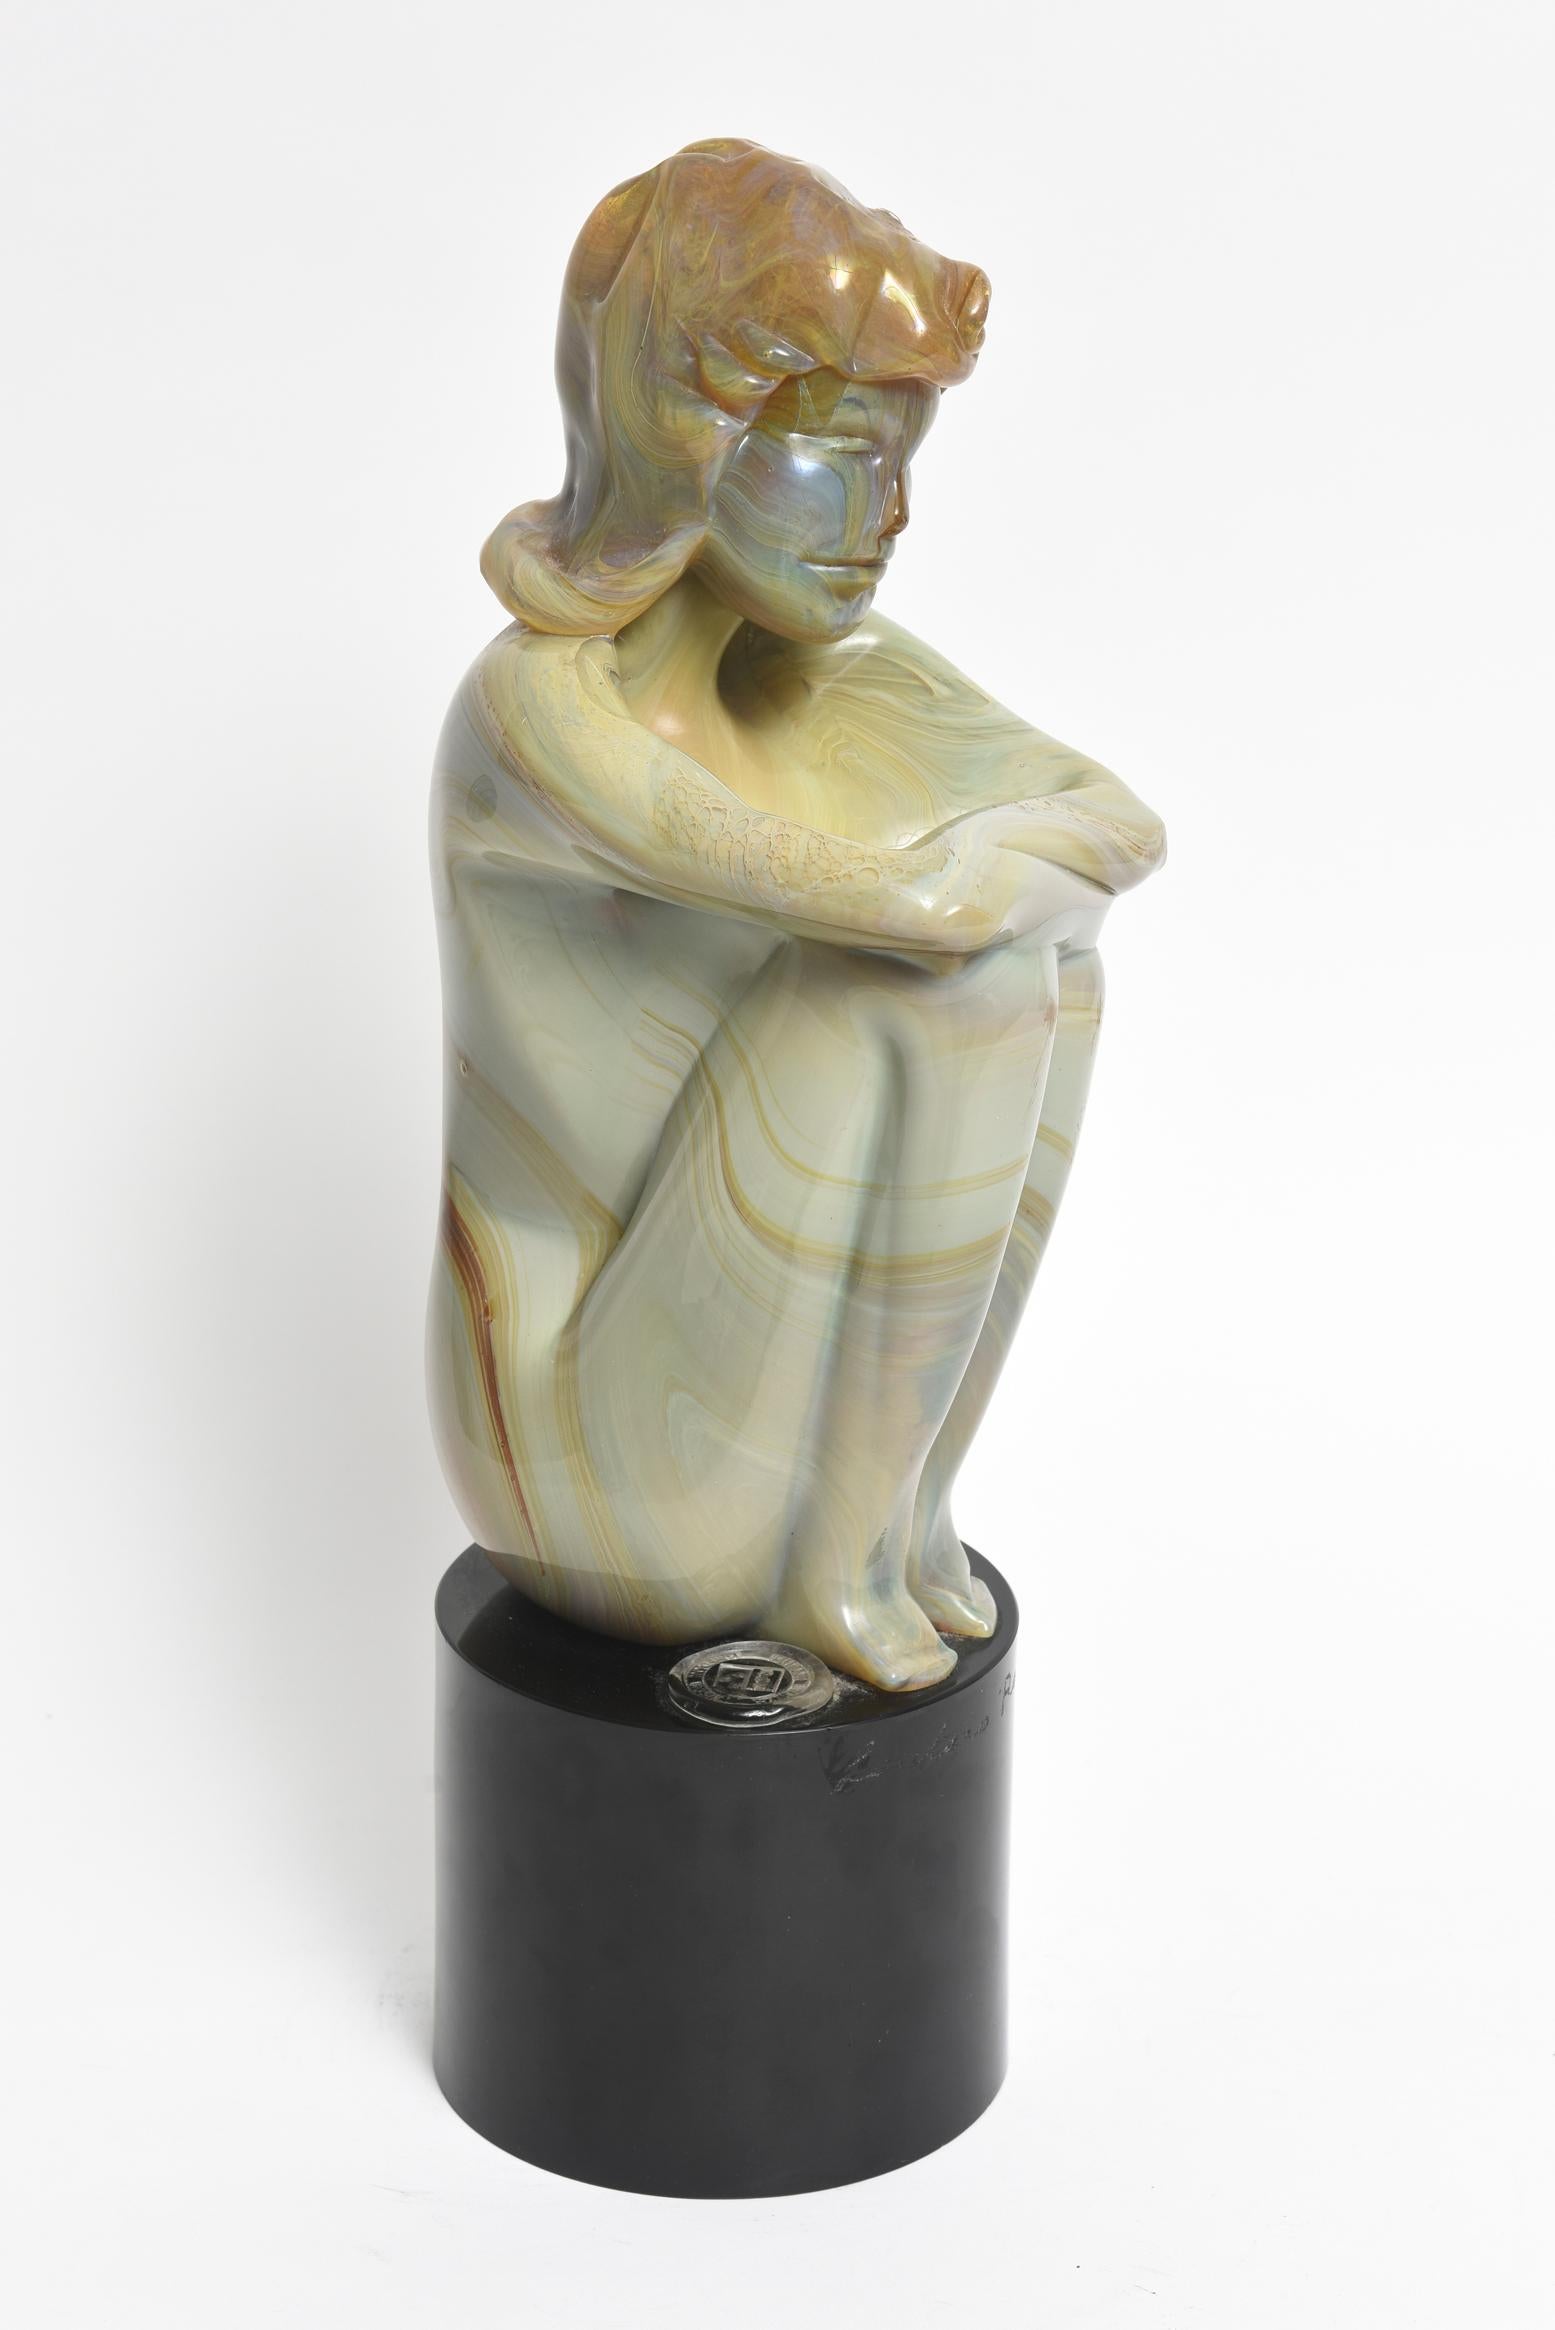 Loredano Rosin (Italian 1936-1992)
Beautiful Murano glass sculpture of a female nude seated or kneeling with shoulder length hair and her arms crossed over her legs. The type of glass is called calcedonia resulting in tones of yellow, green, blue